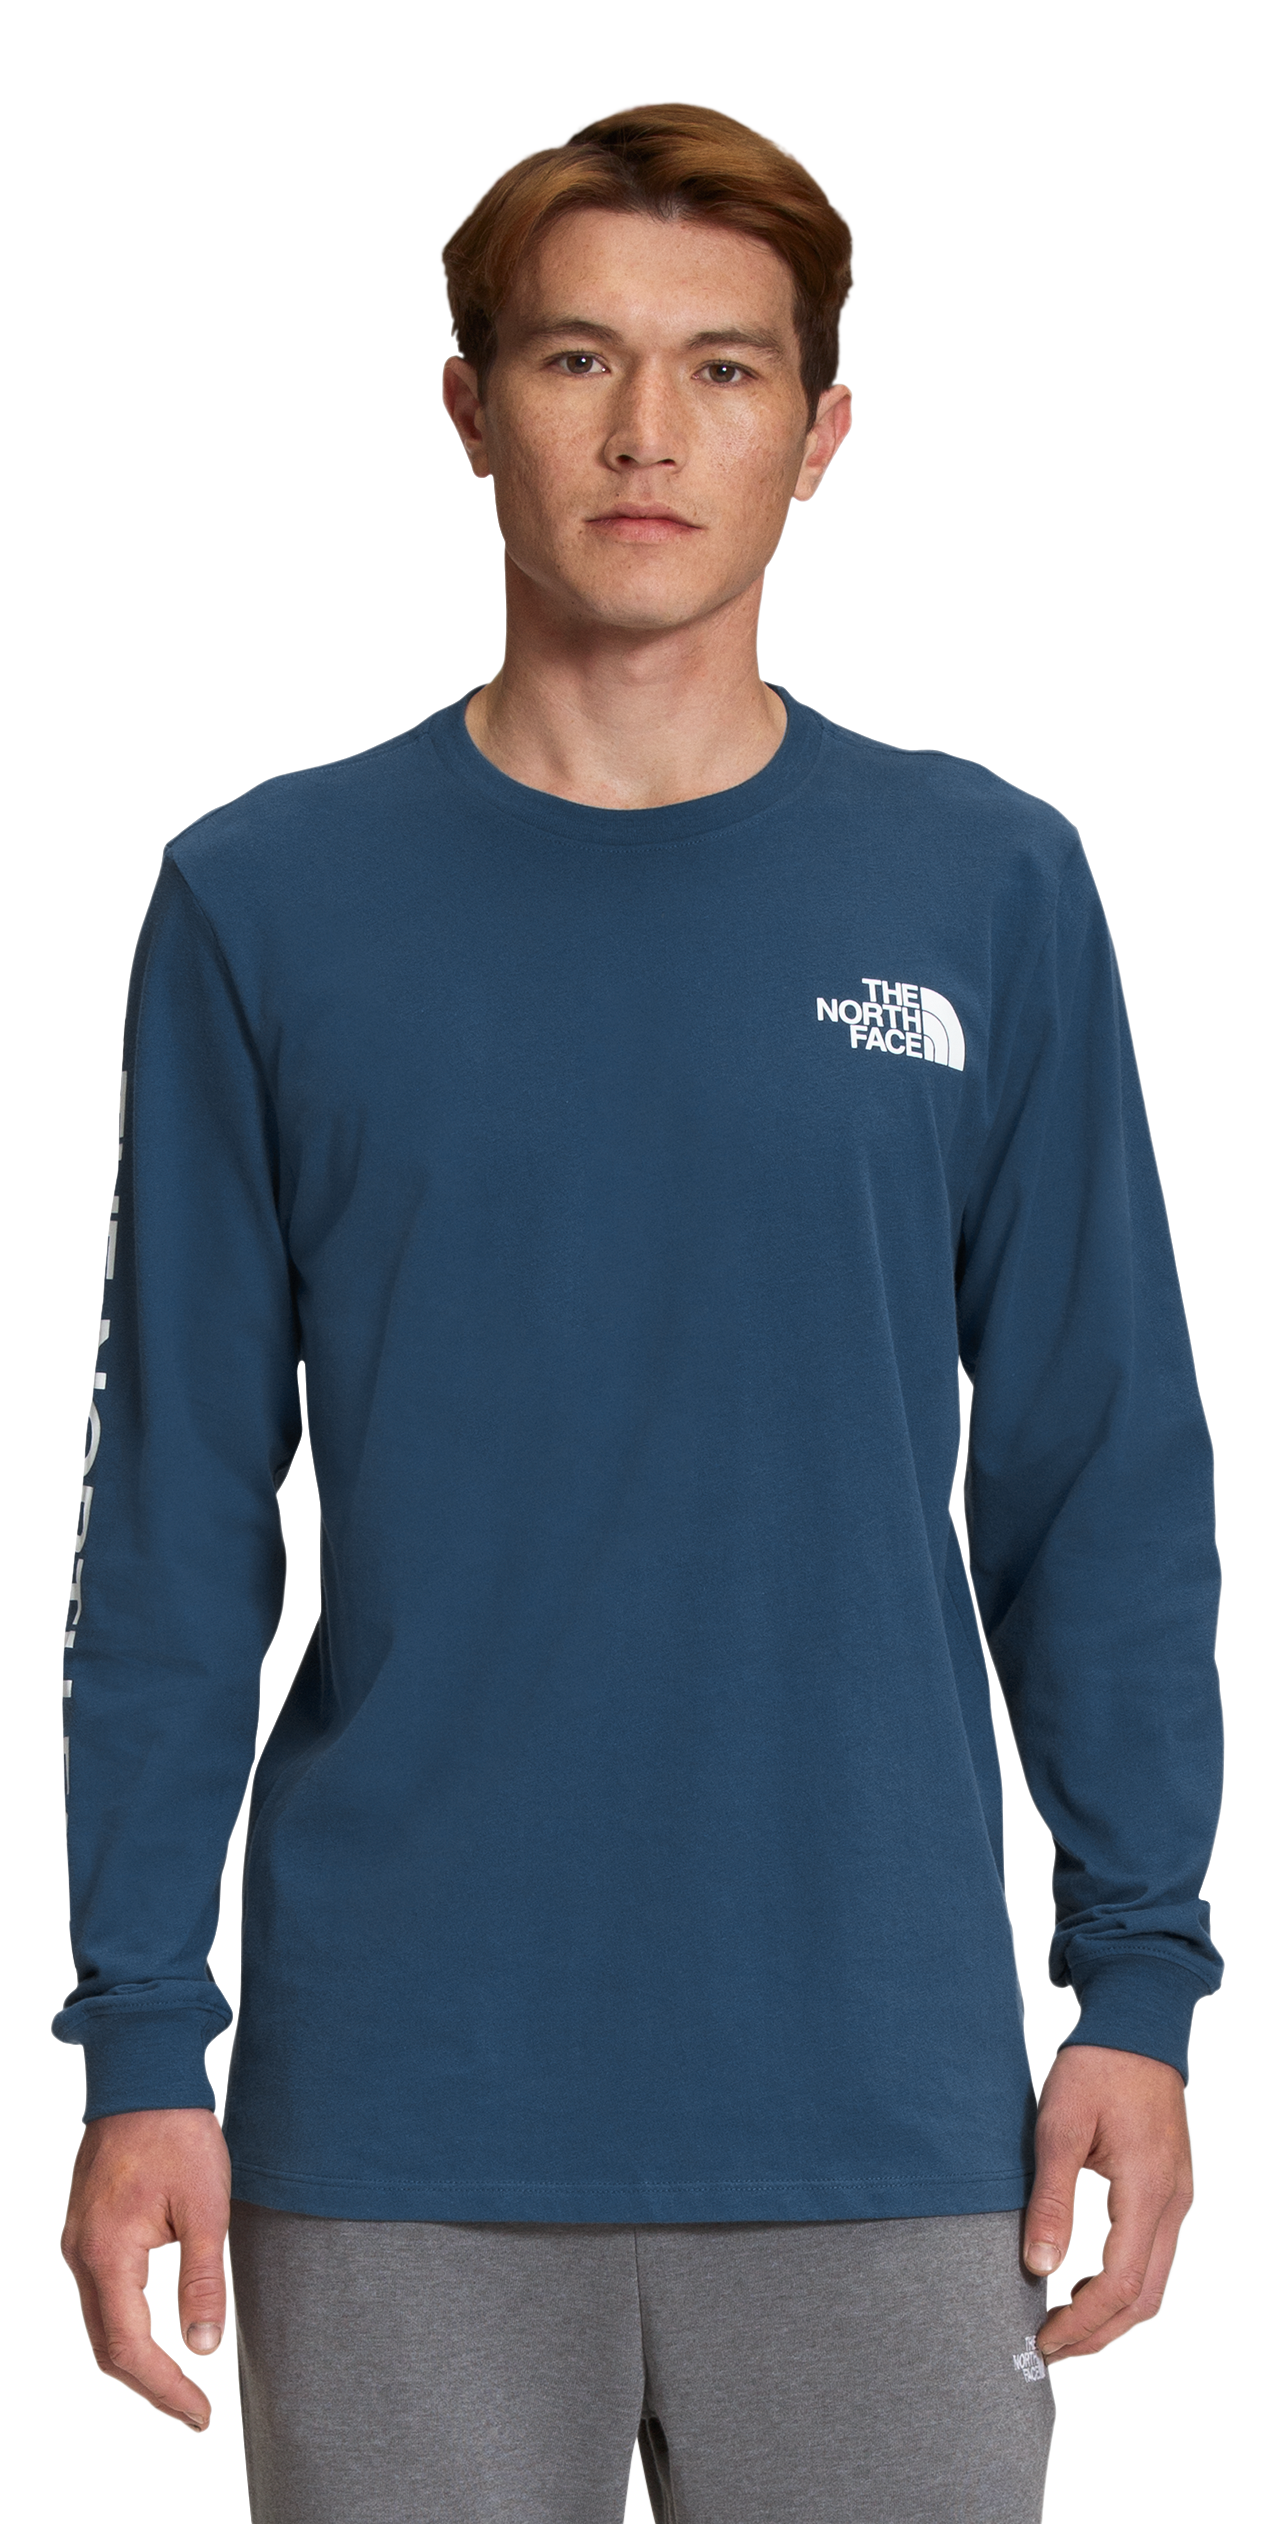 The North Face TNF Sleeve Hit Long-Sleeve T-Shirt for Men - shady Blue/TNF White - S